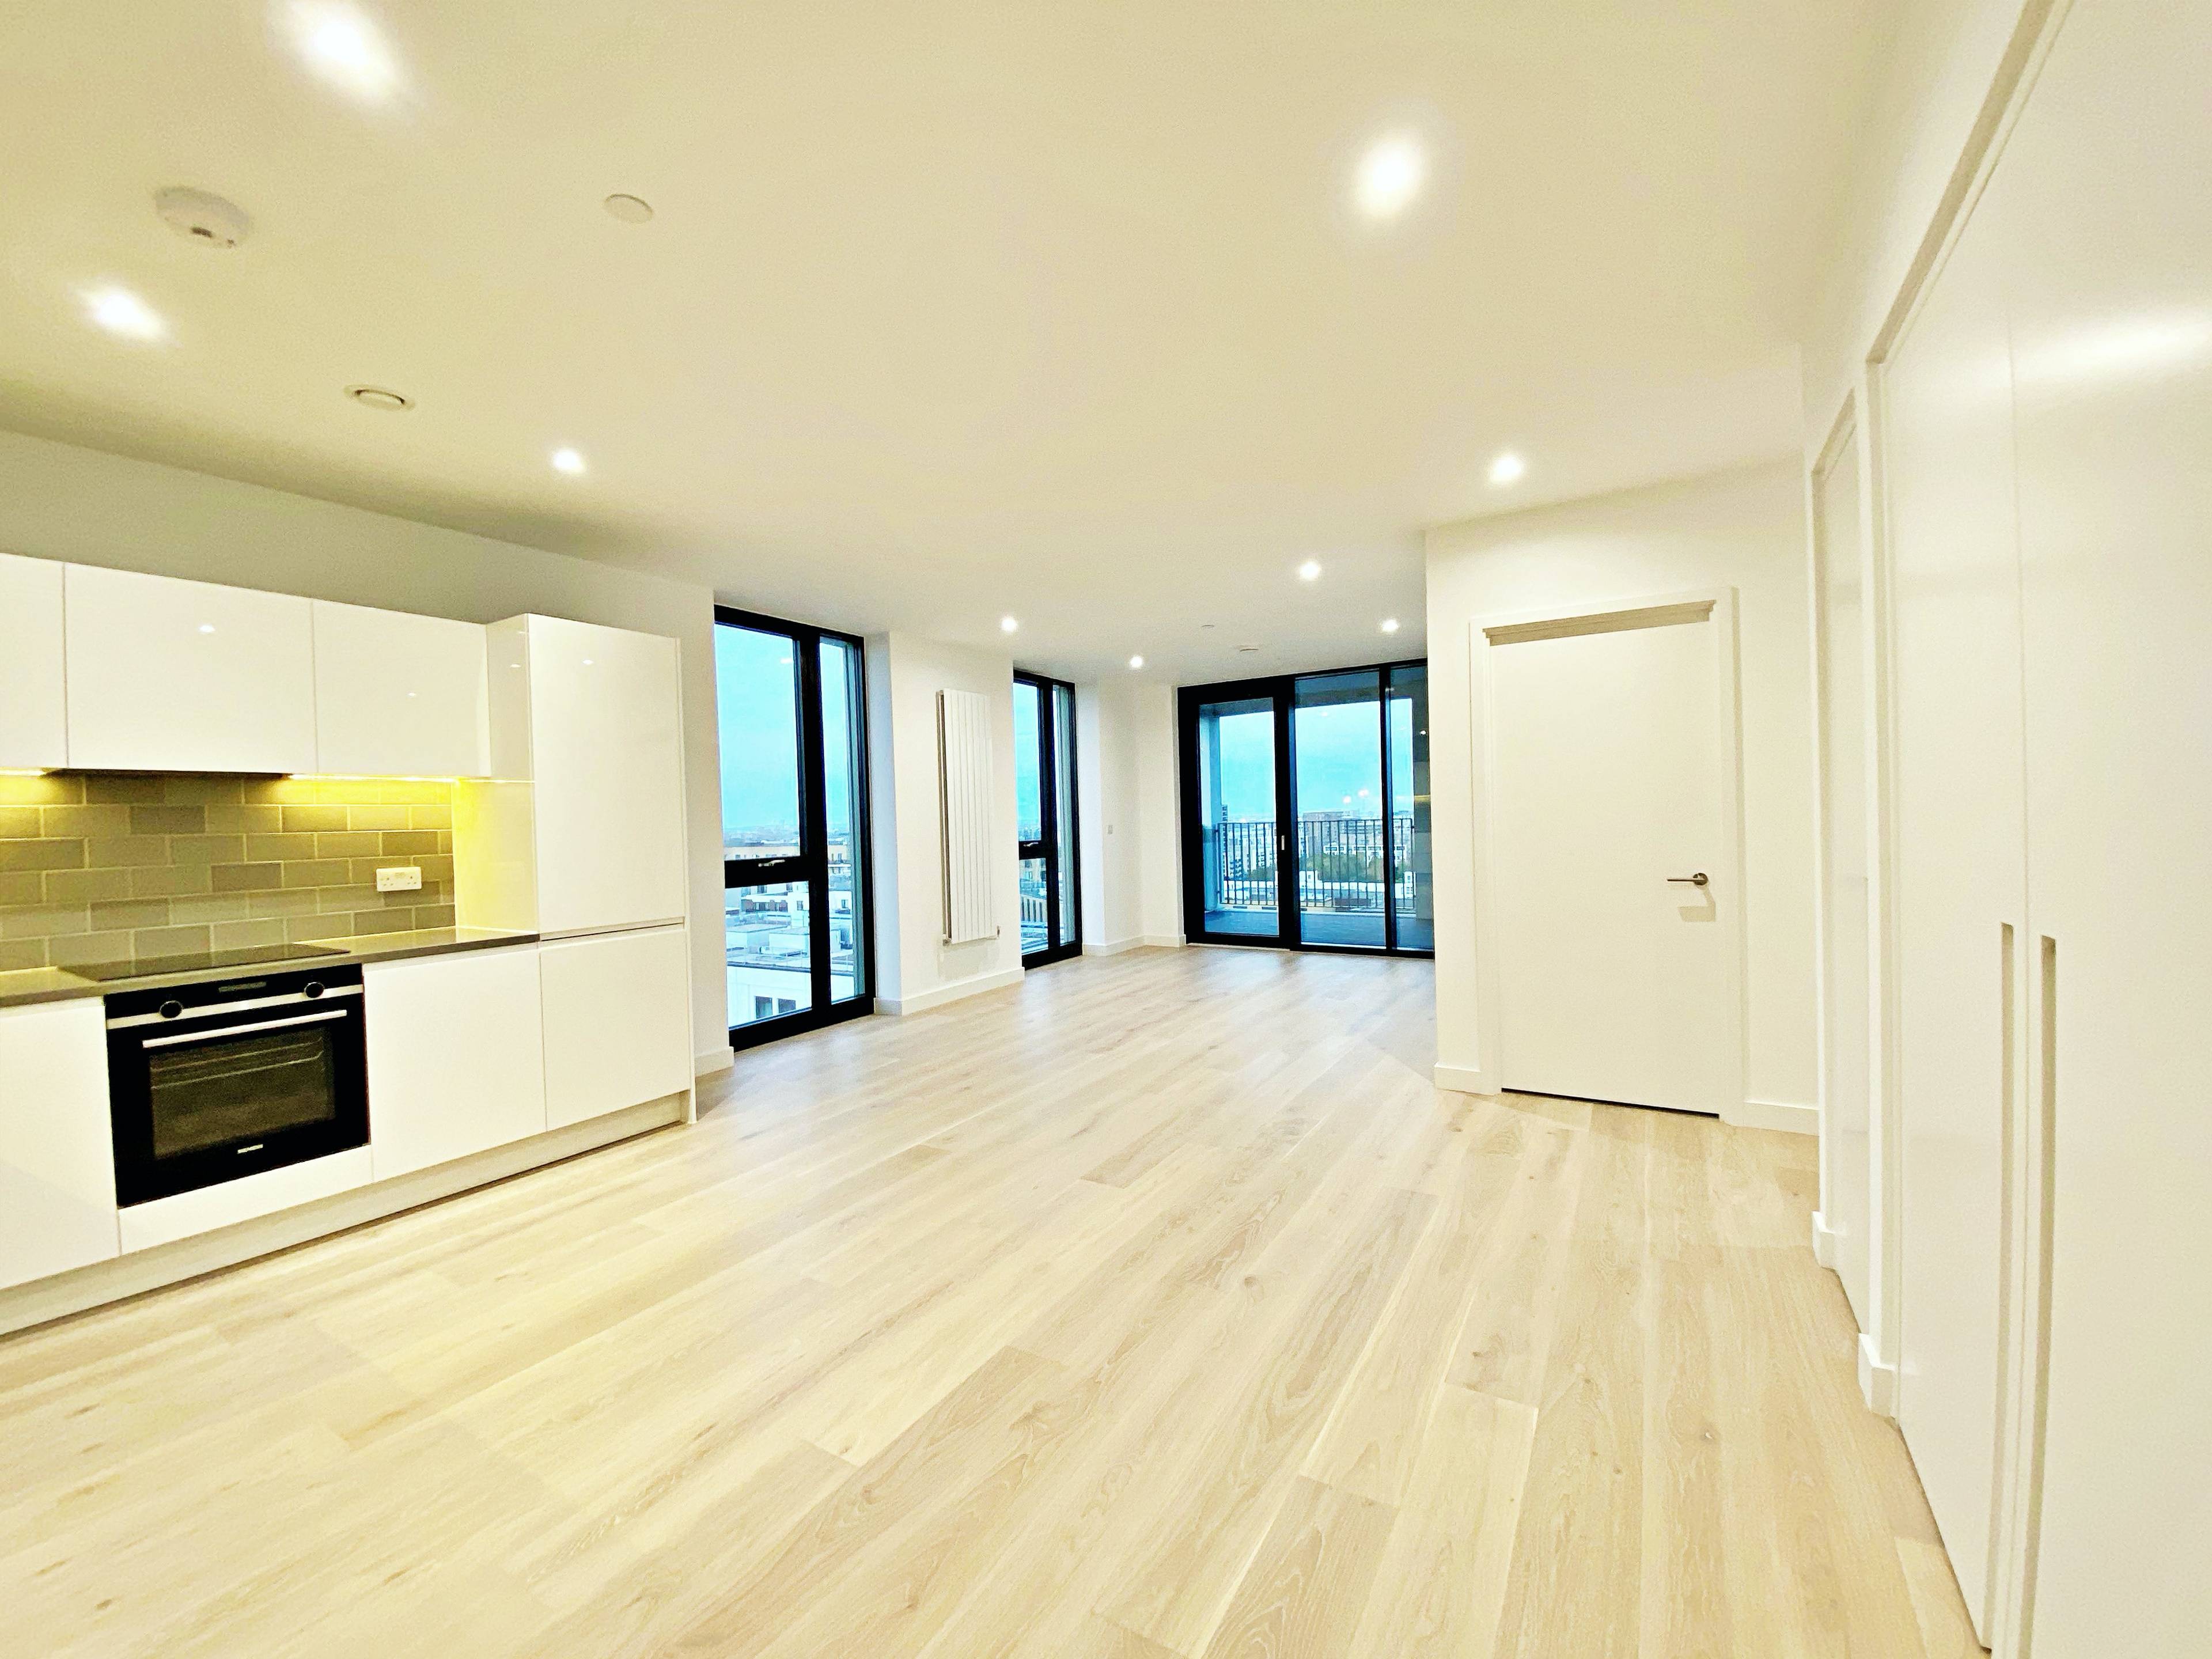 2BD Apartment with Amazing Views in Royal Wharf